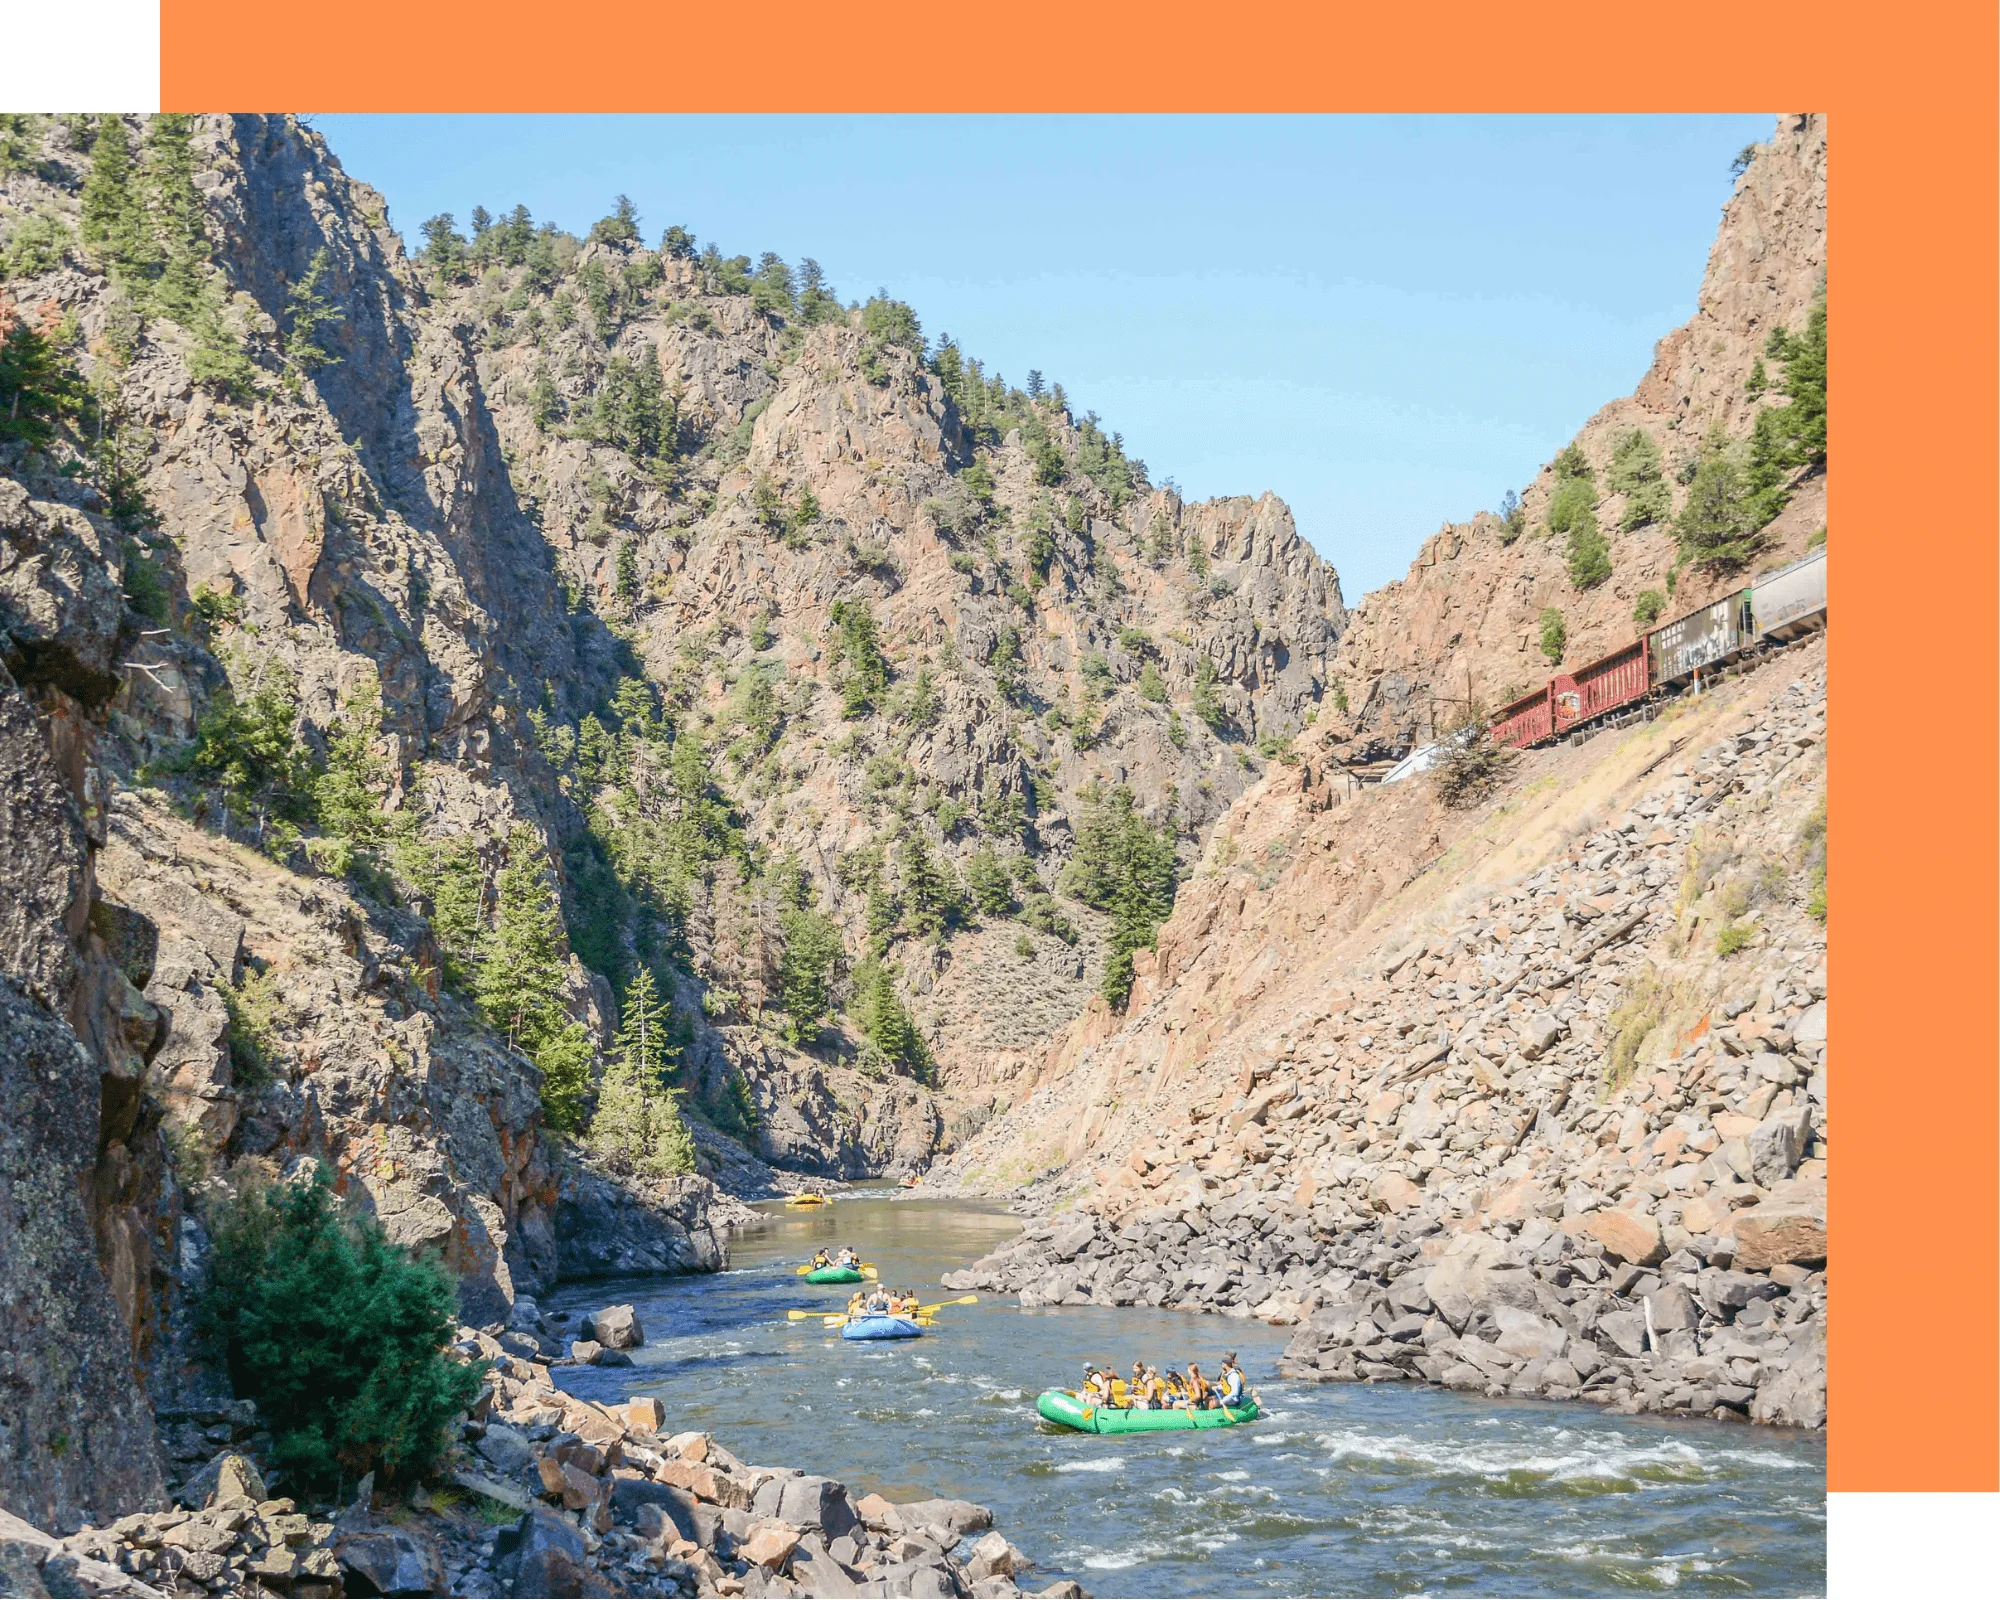 Rafting on the Colorado River